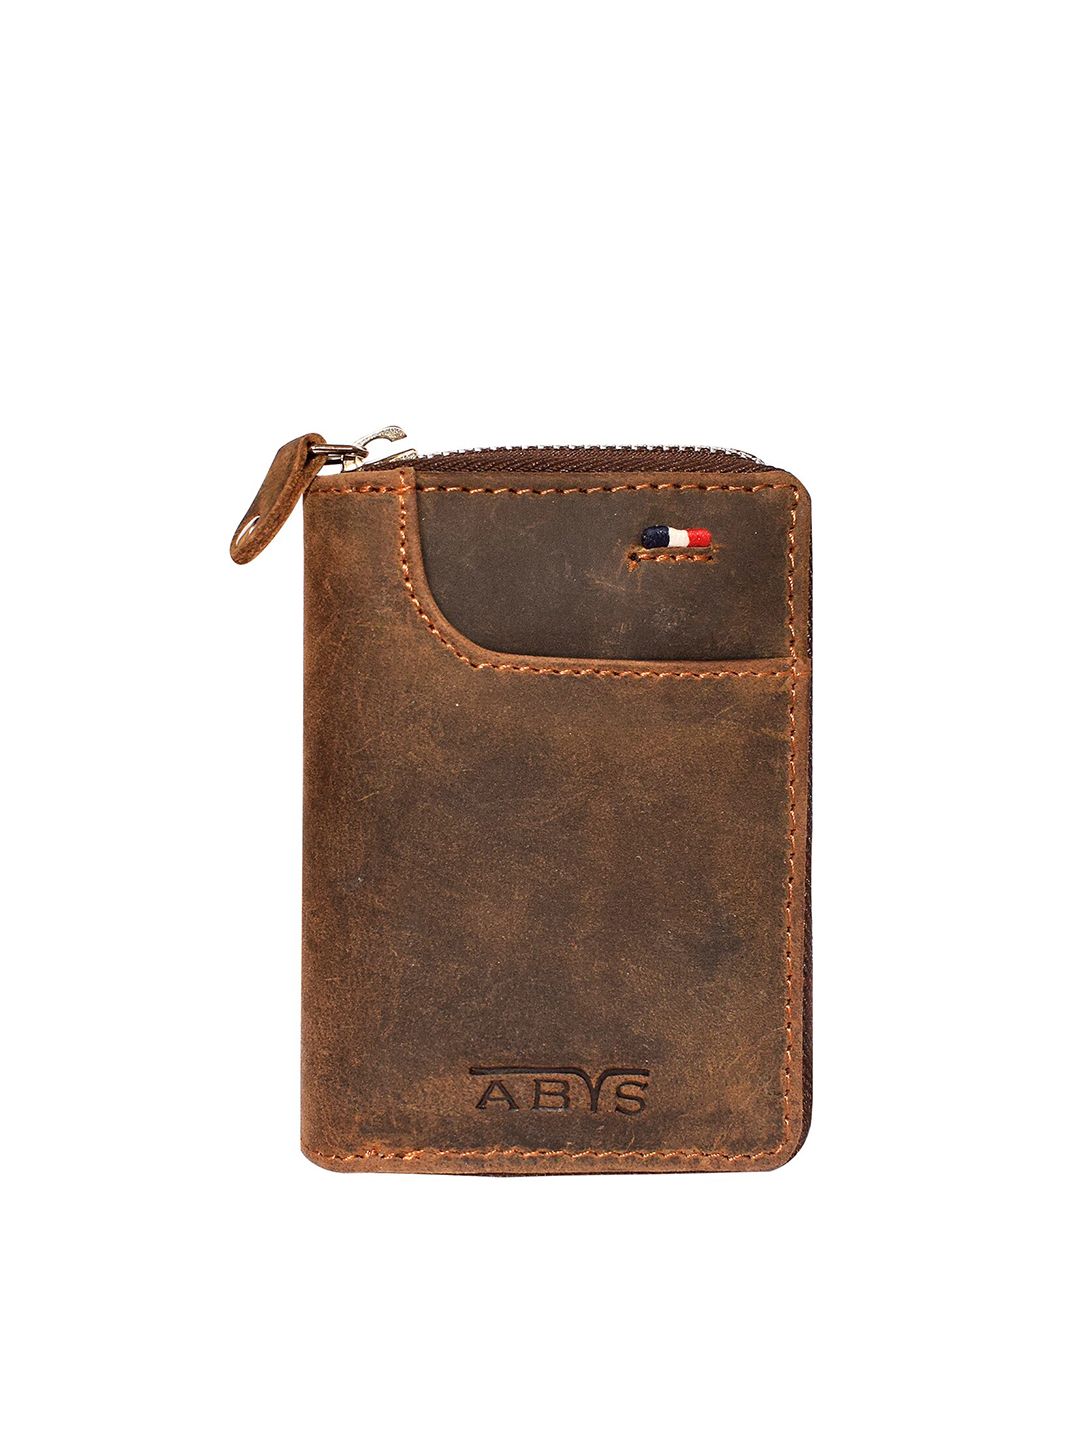 ABYS Unisex Brown Leather Zip Around Wallet Price in India